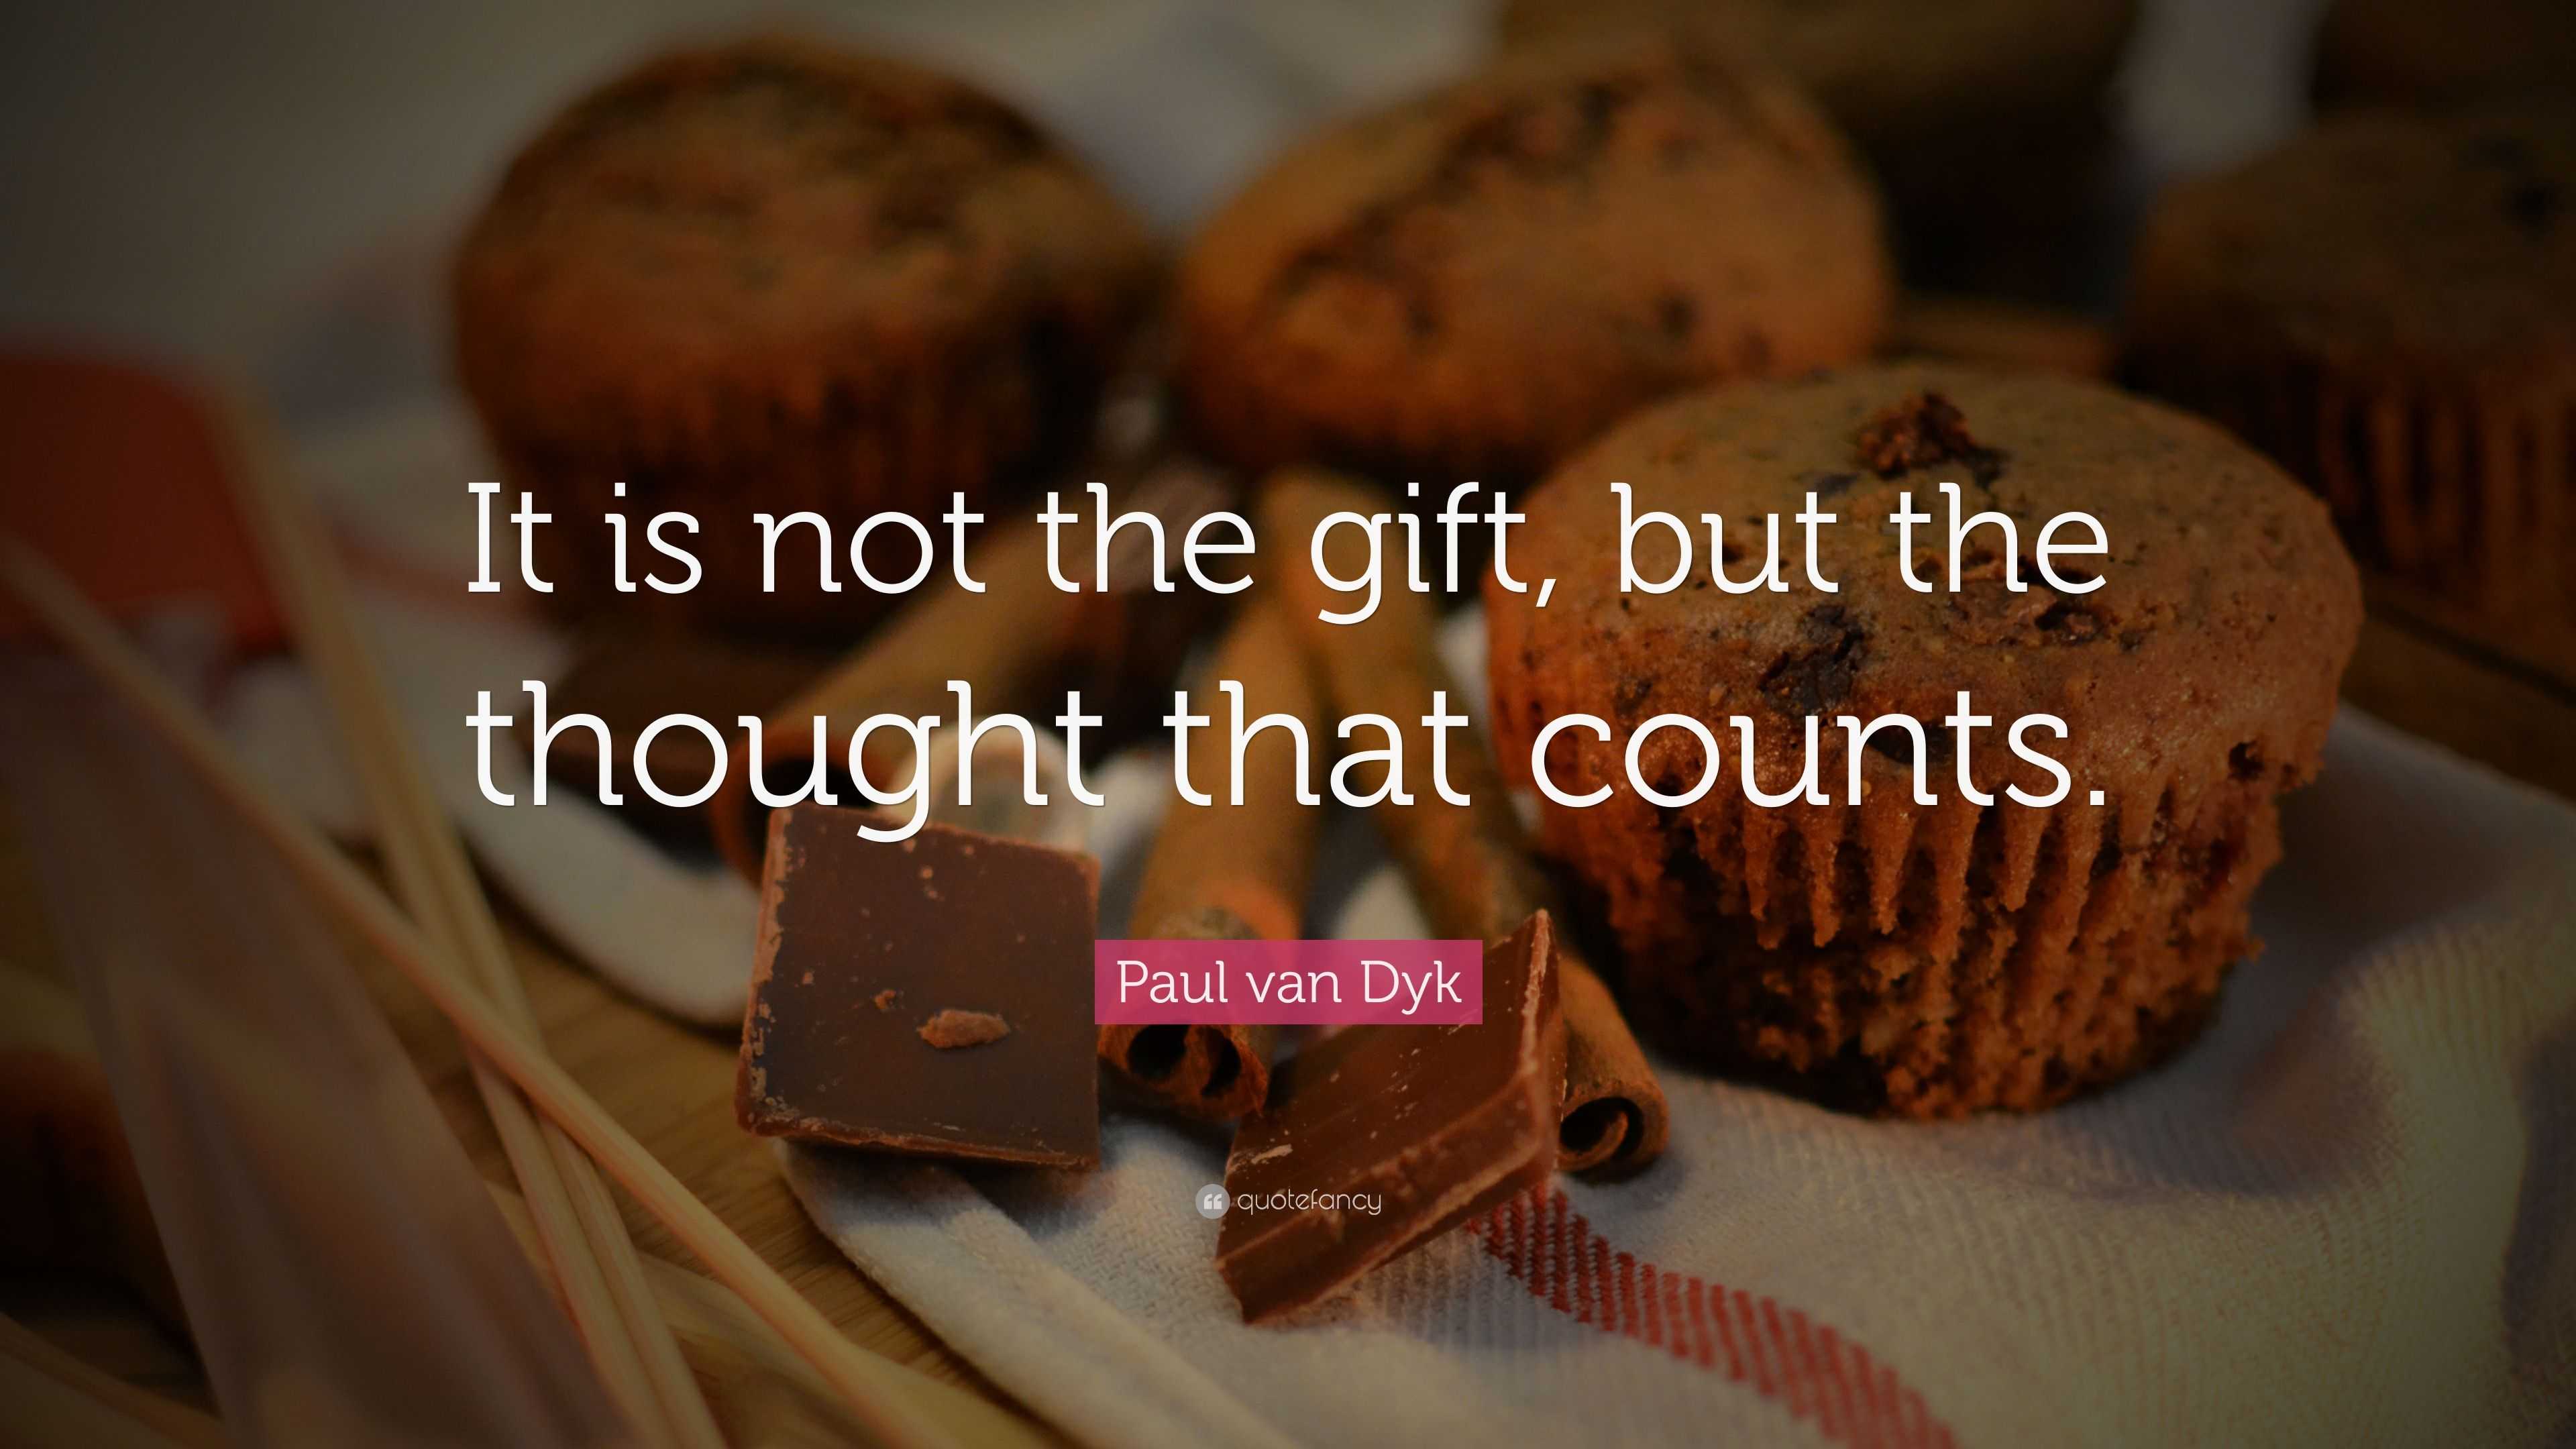 Paul van Dyk Quote: “It is not the gift, but the thought that counts.”